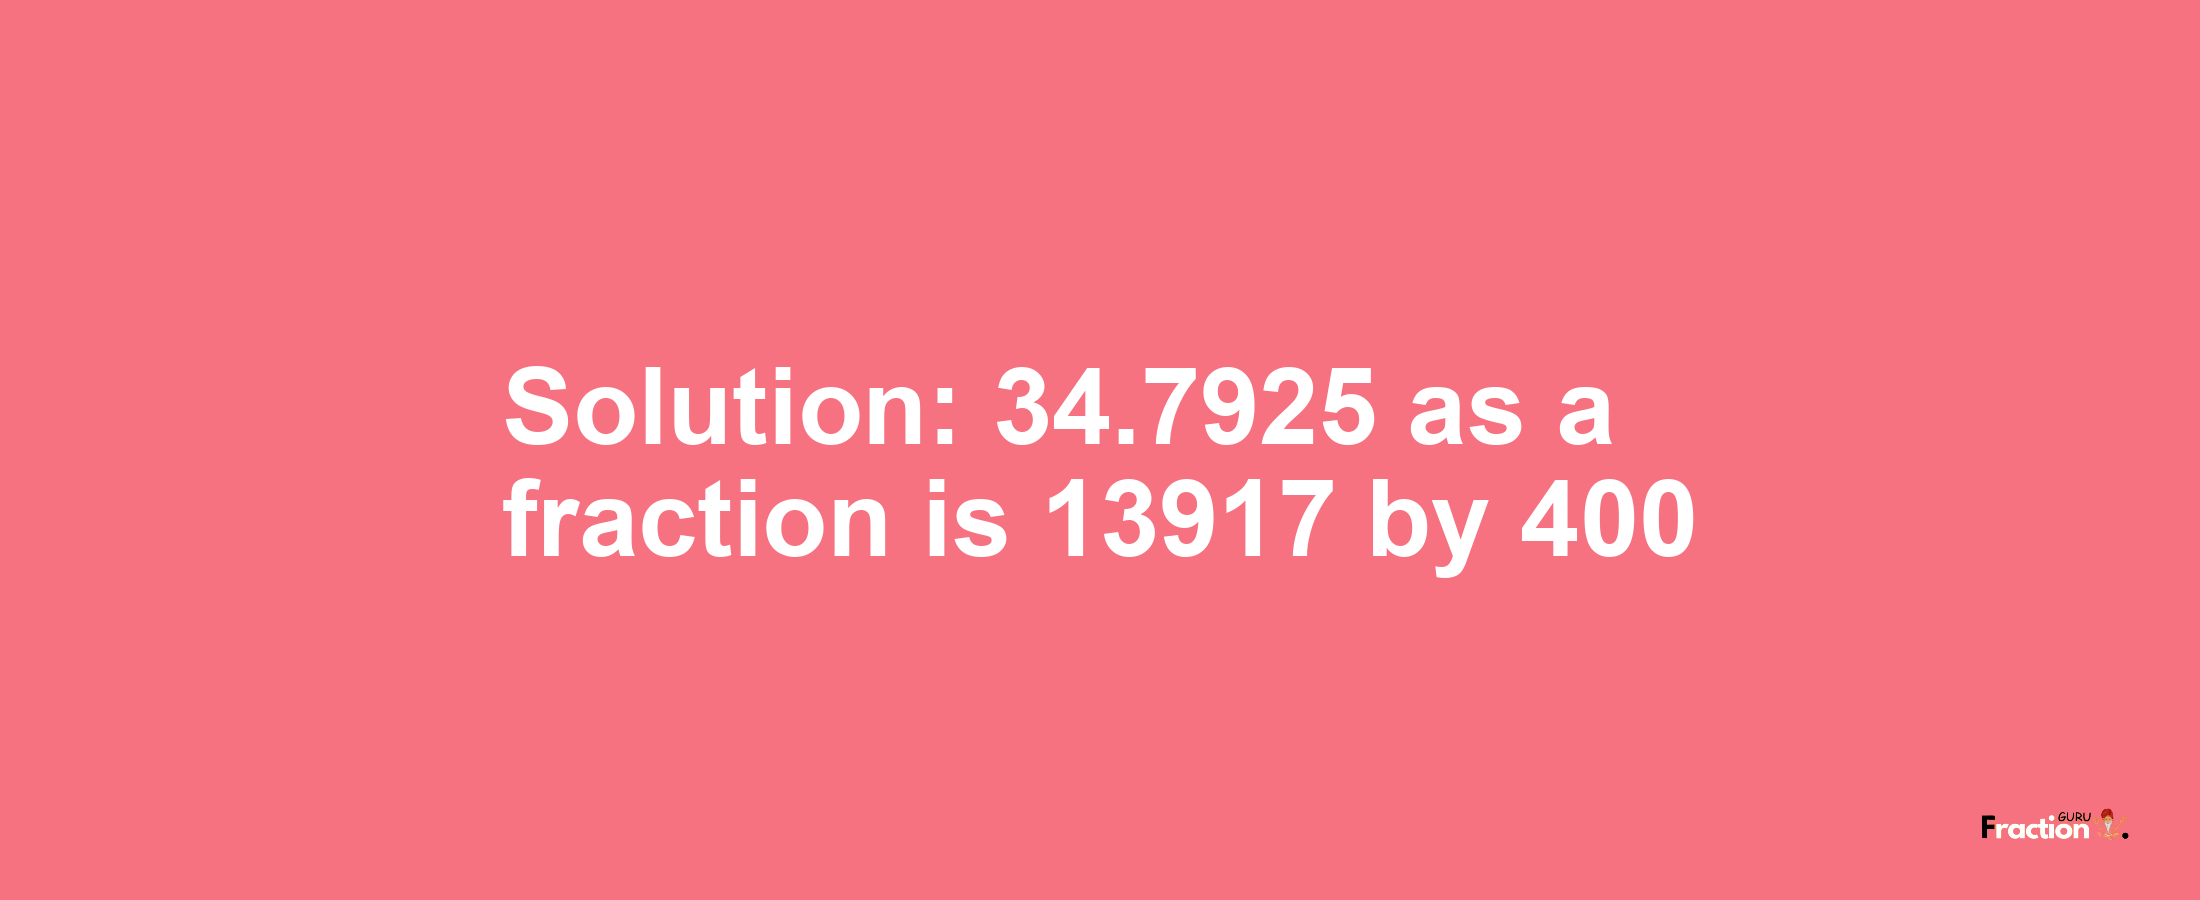 Solution:34.7925 as a fraction is 13917/400